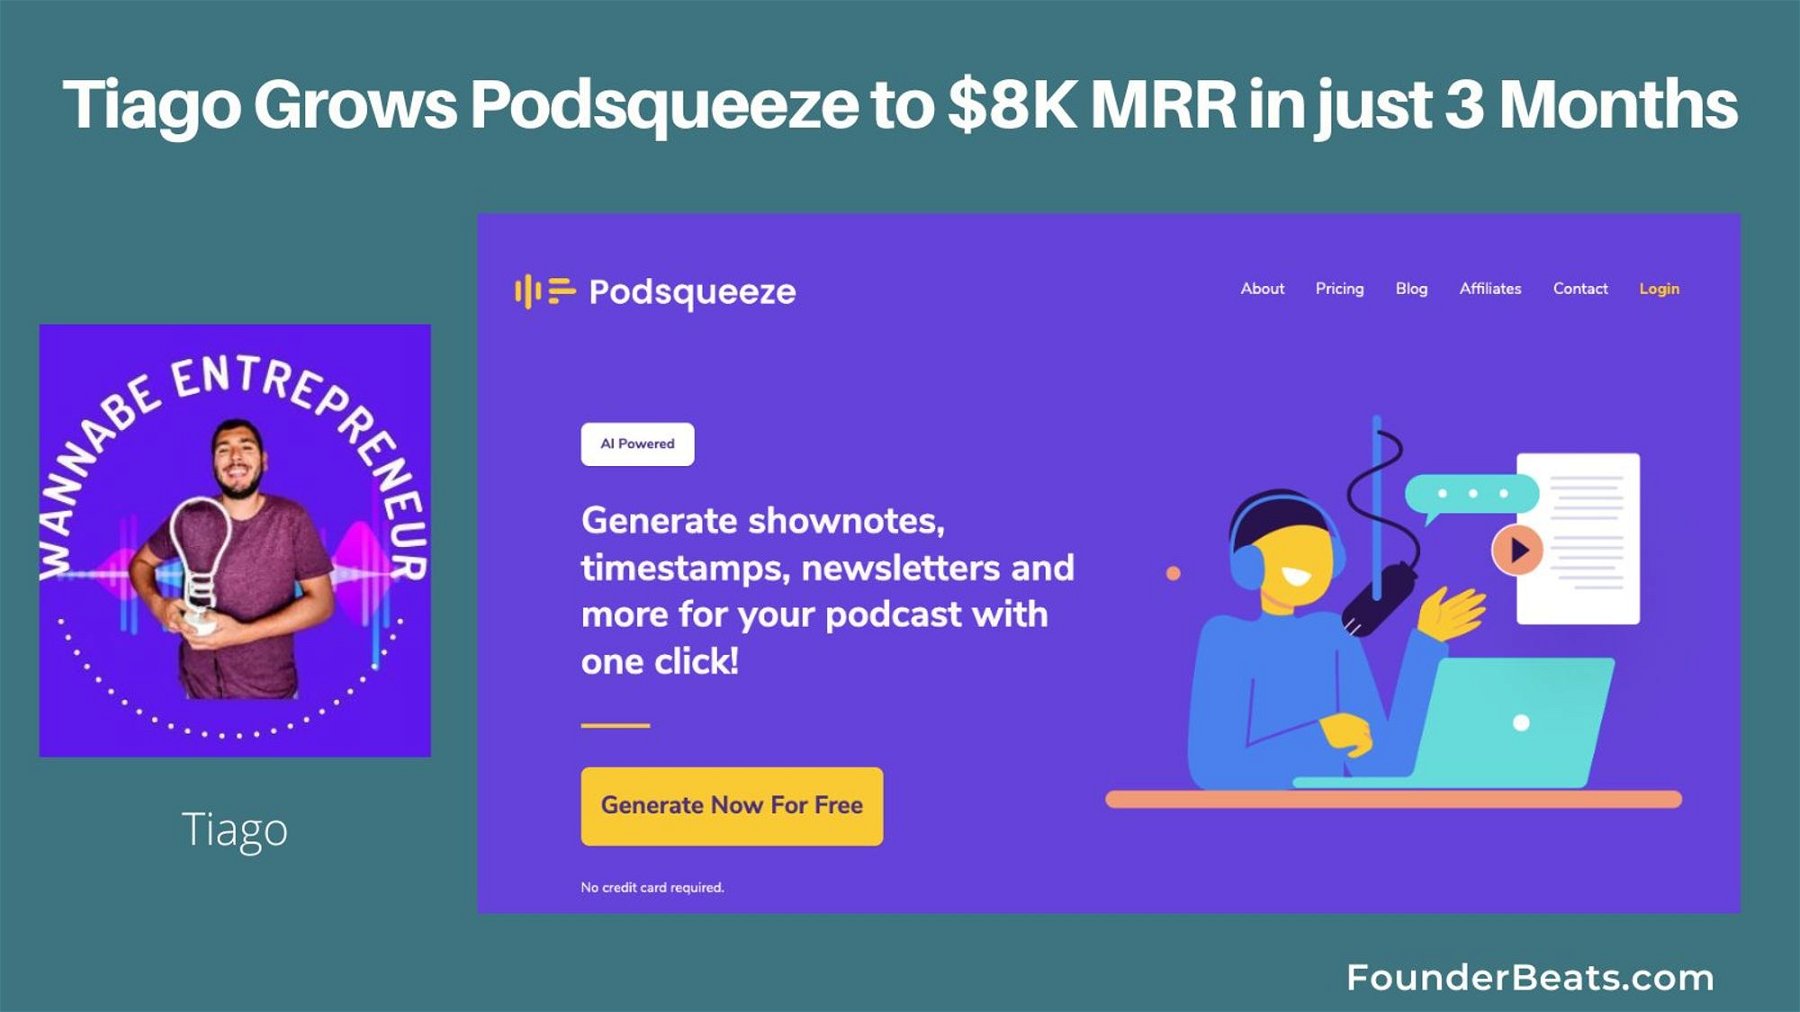 Tiago Grows Podsqueeze to $8K MRR in just 3 Months